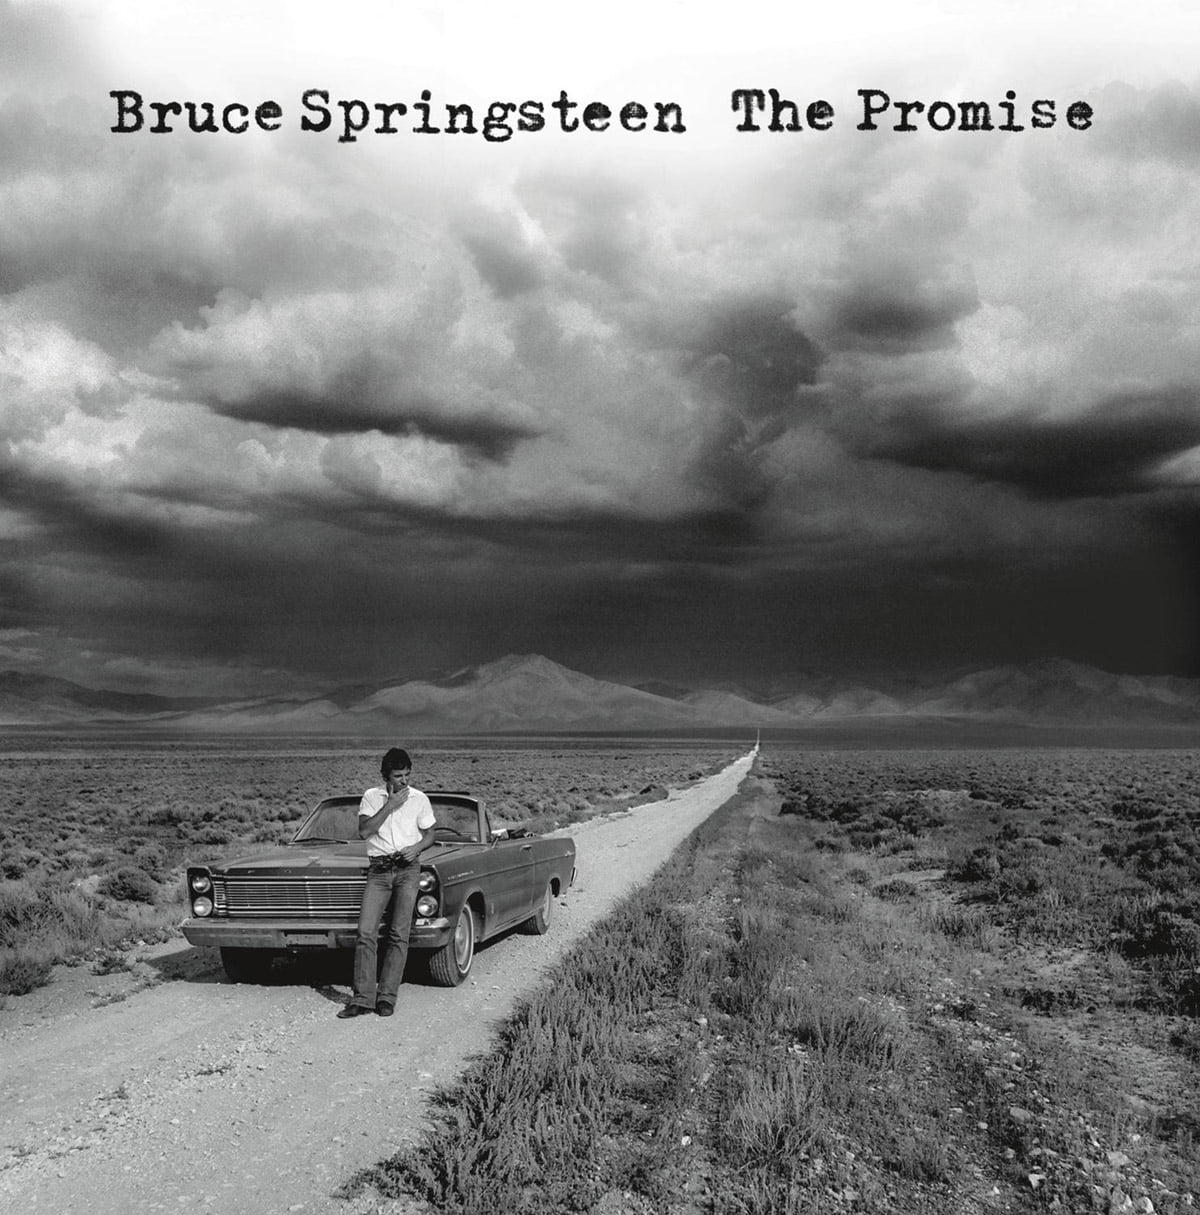 Bruce Springsteen The Promise front cover